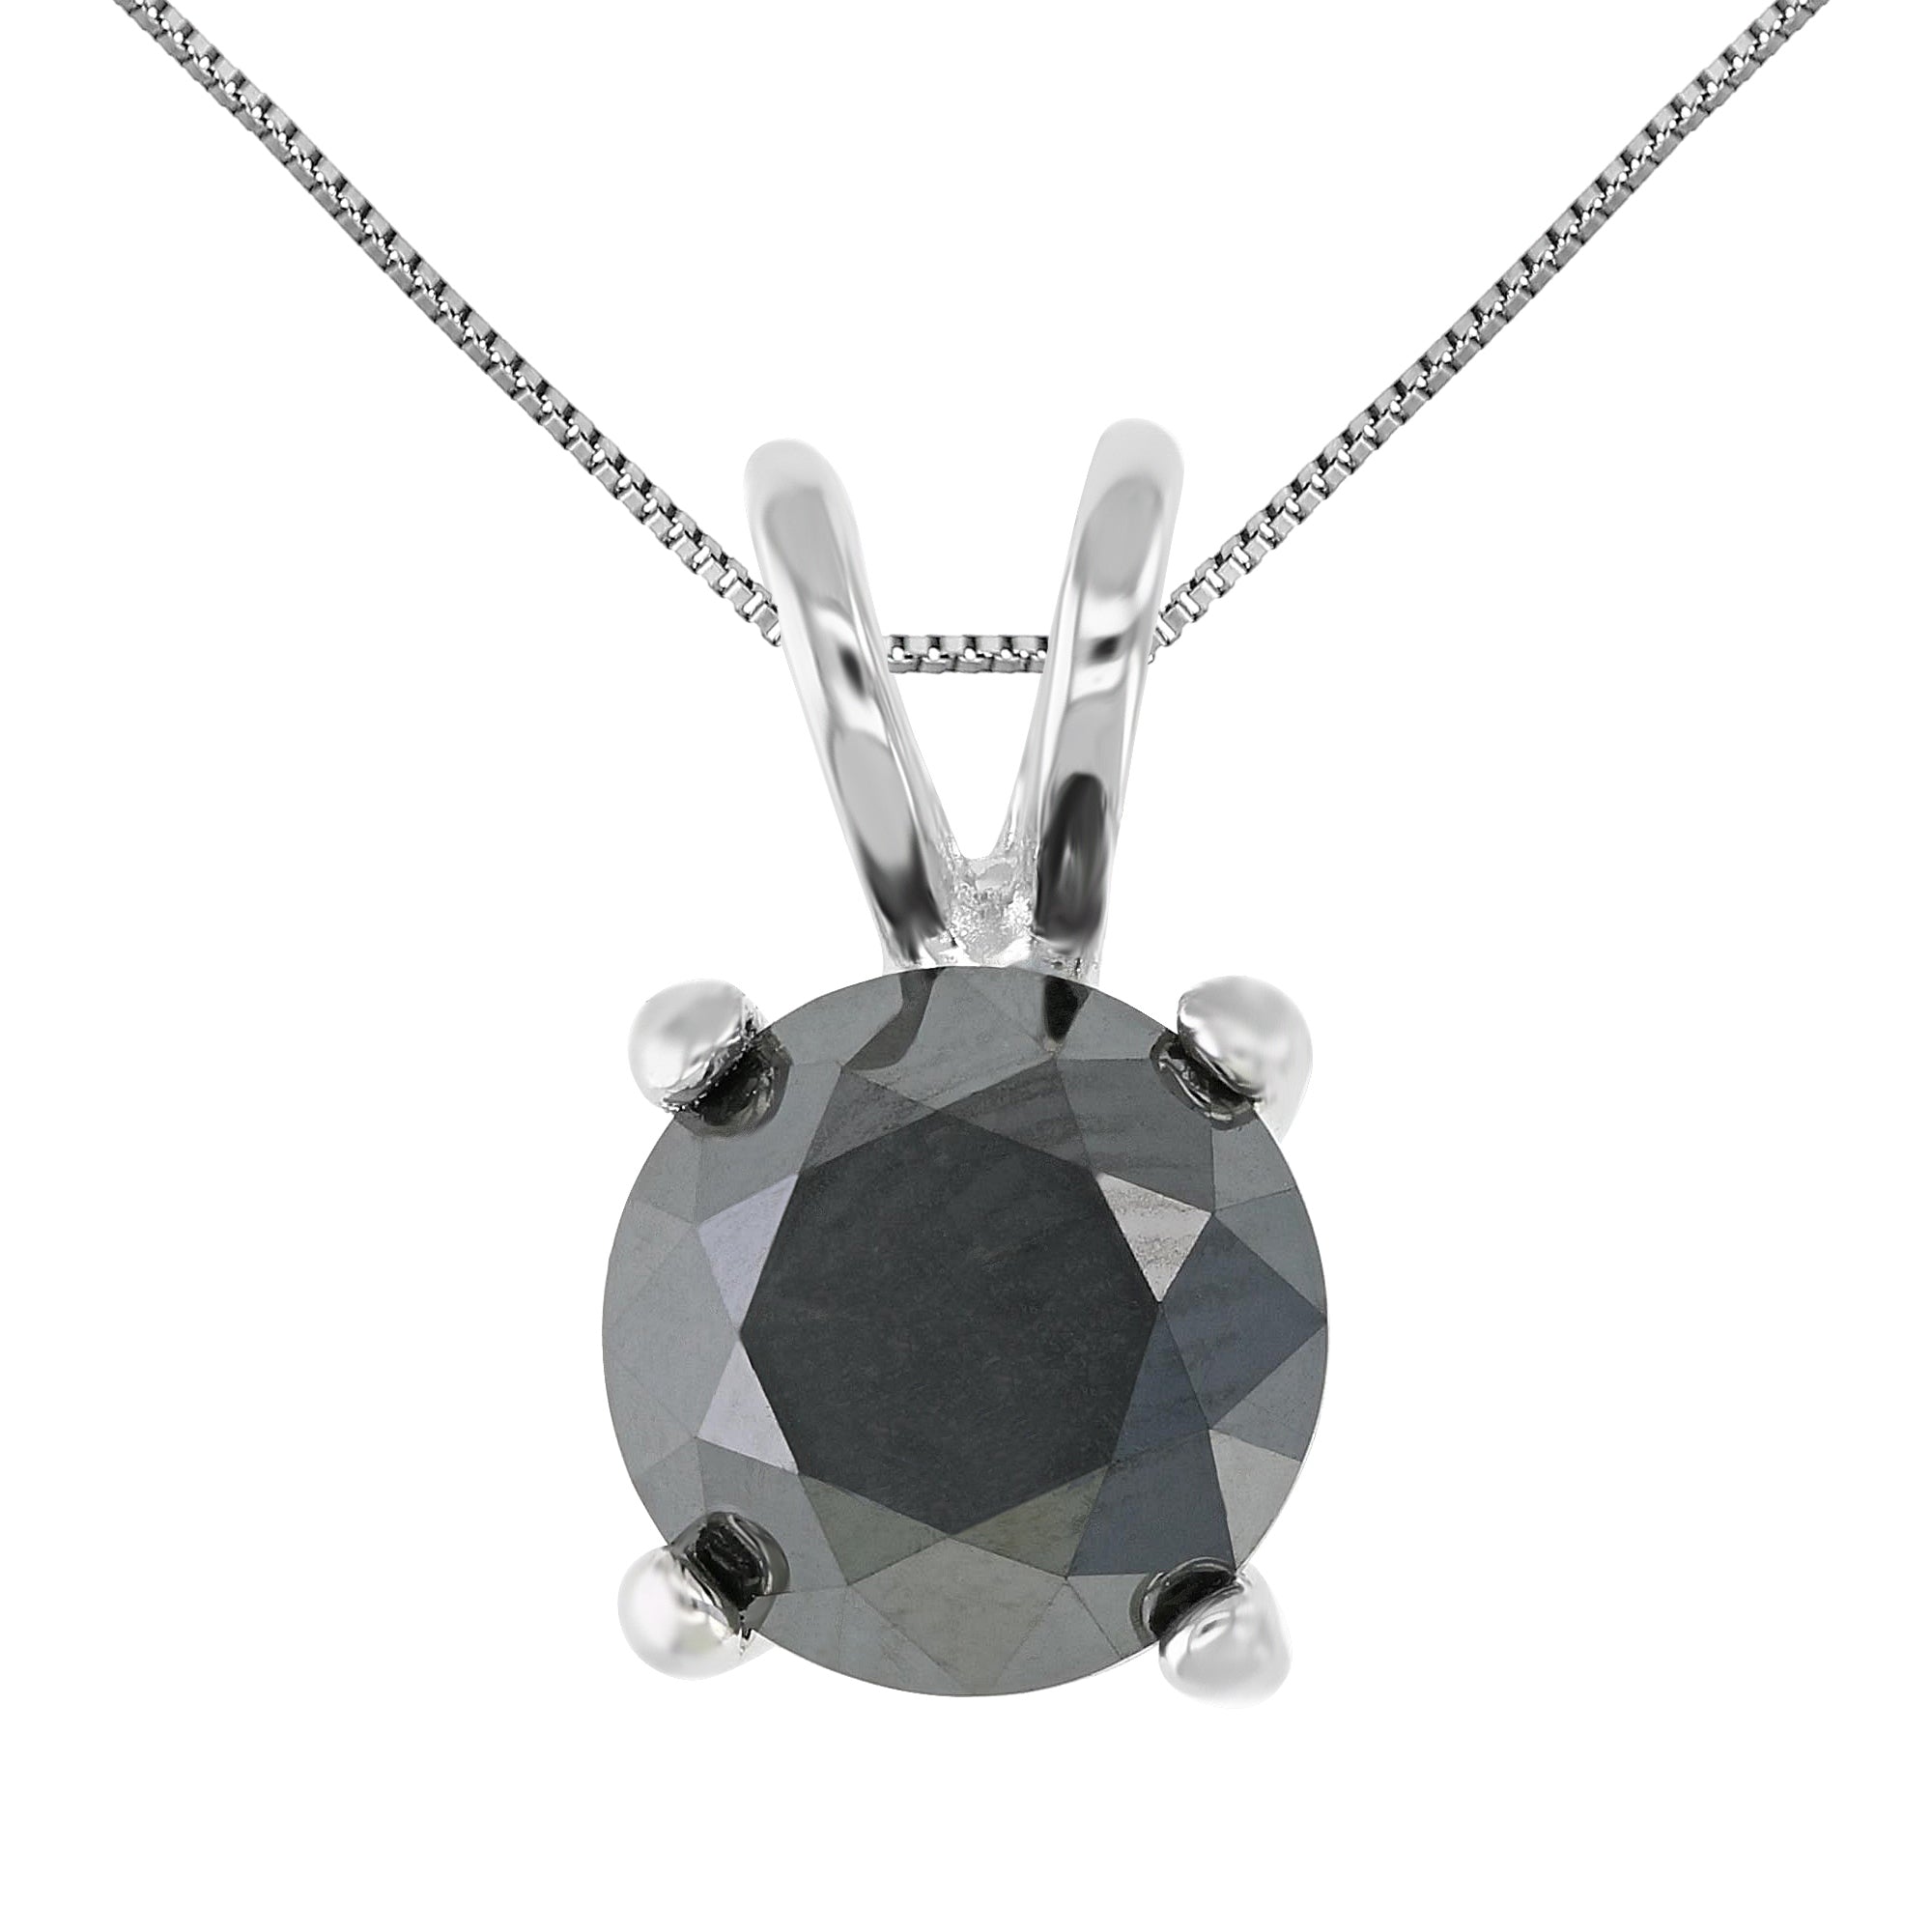 6 cttw Diamond Pendant, Black Diamond Solitaire Pendant Necklace for Women in .925 Sterling Silver with Rhodium, 18 Inch Chain, Prong Setting